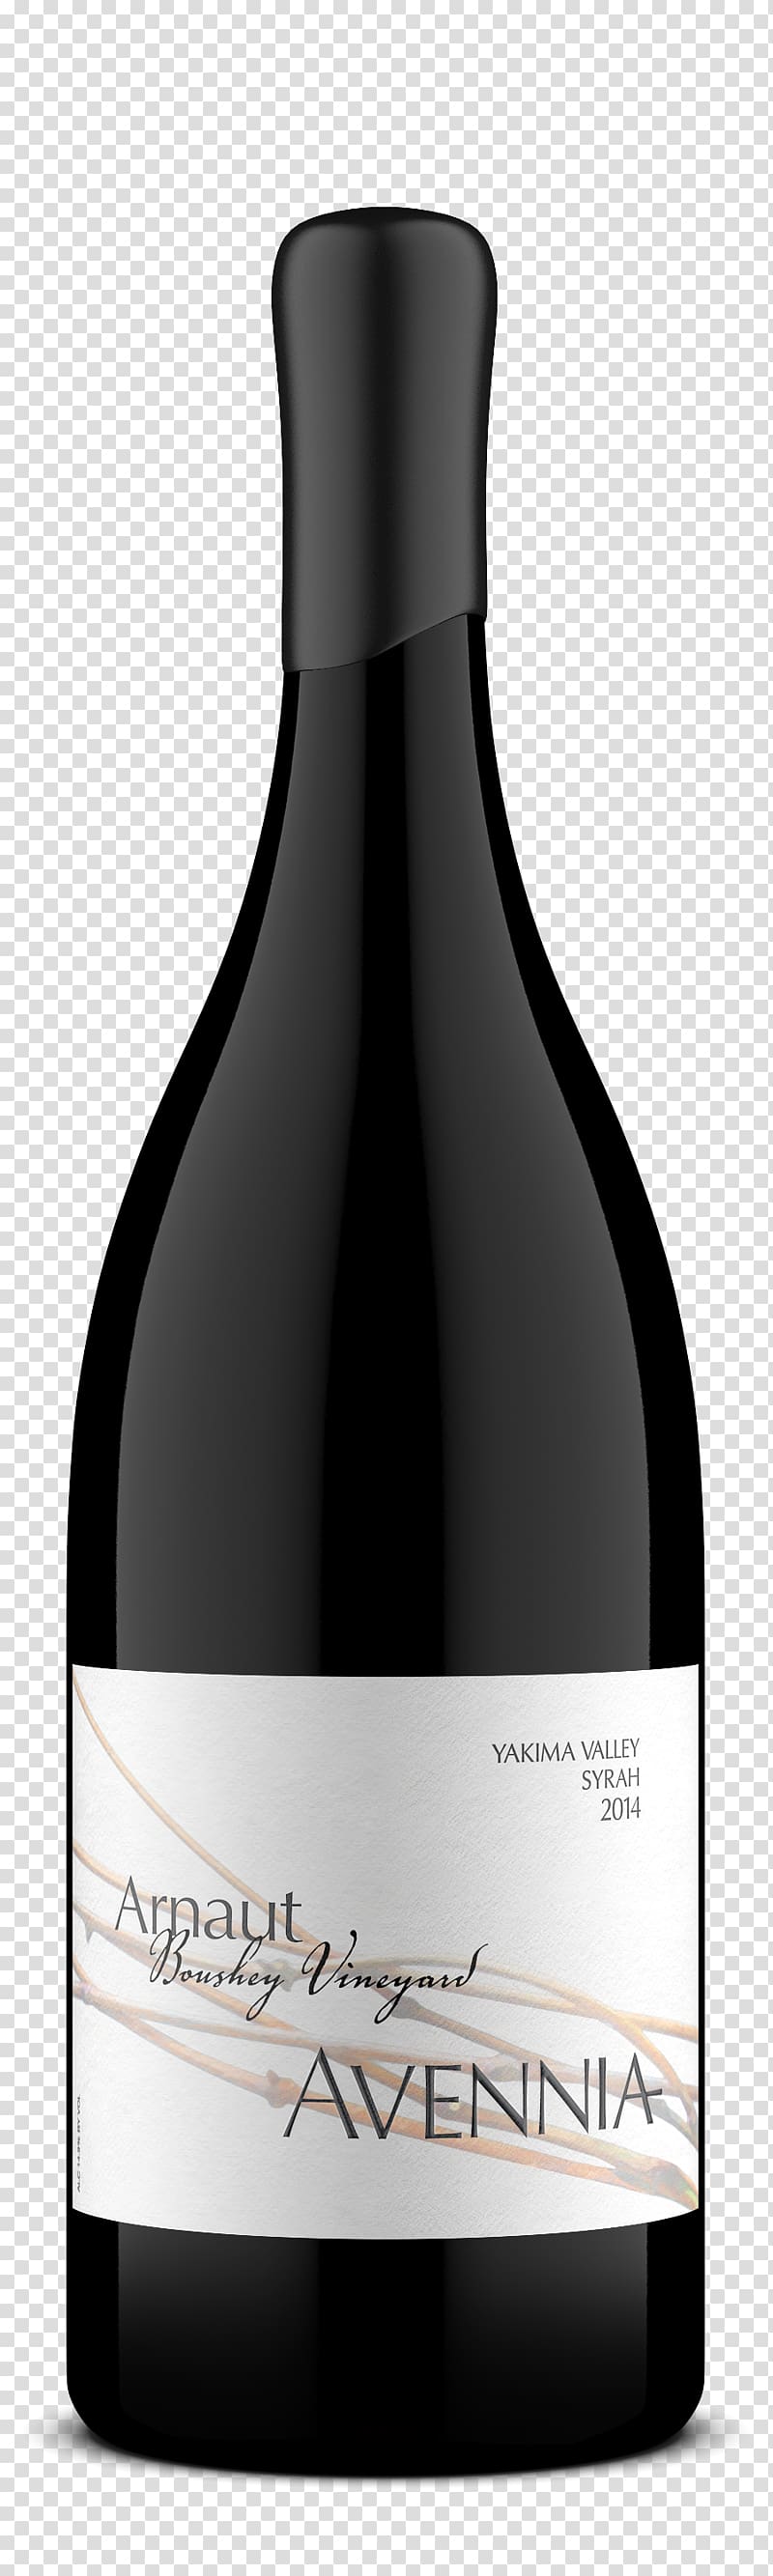 Winery Avennia Tasting Room Magnum Bottle, wine transparent background PNG clipart